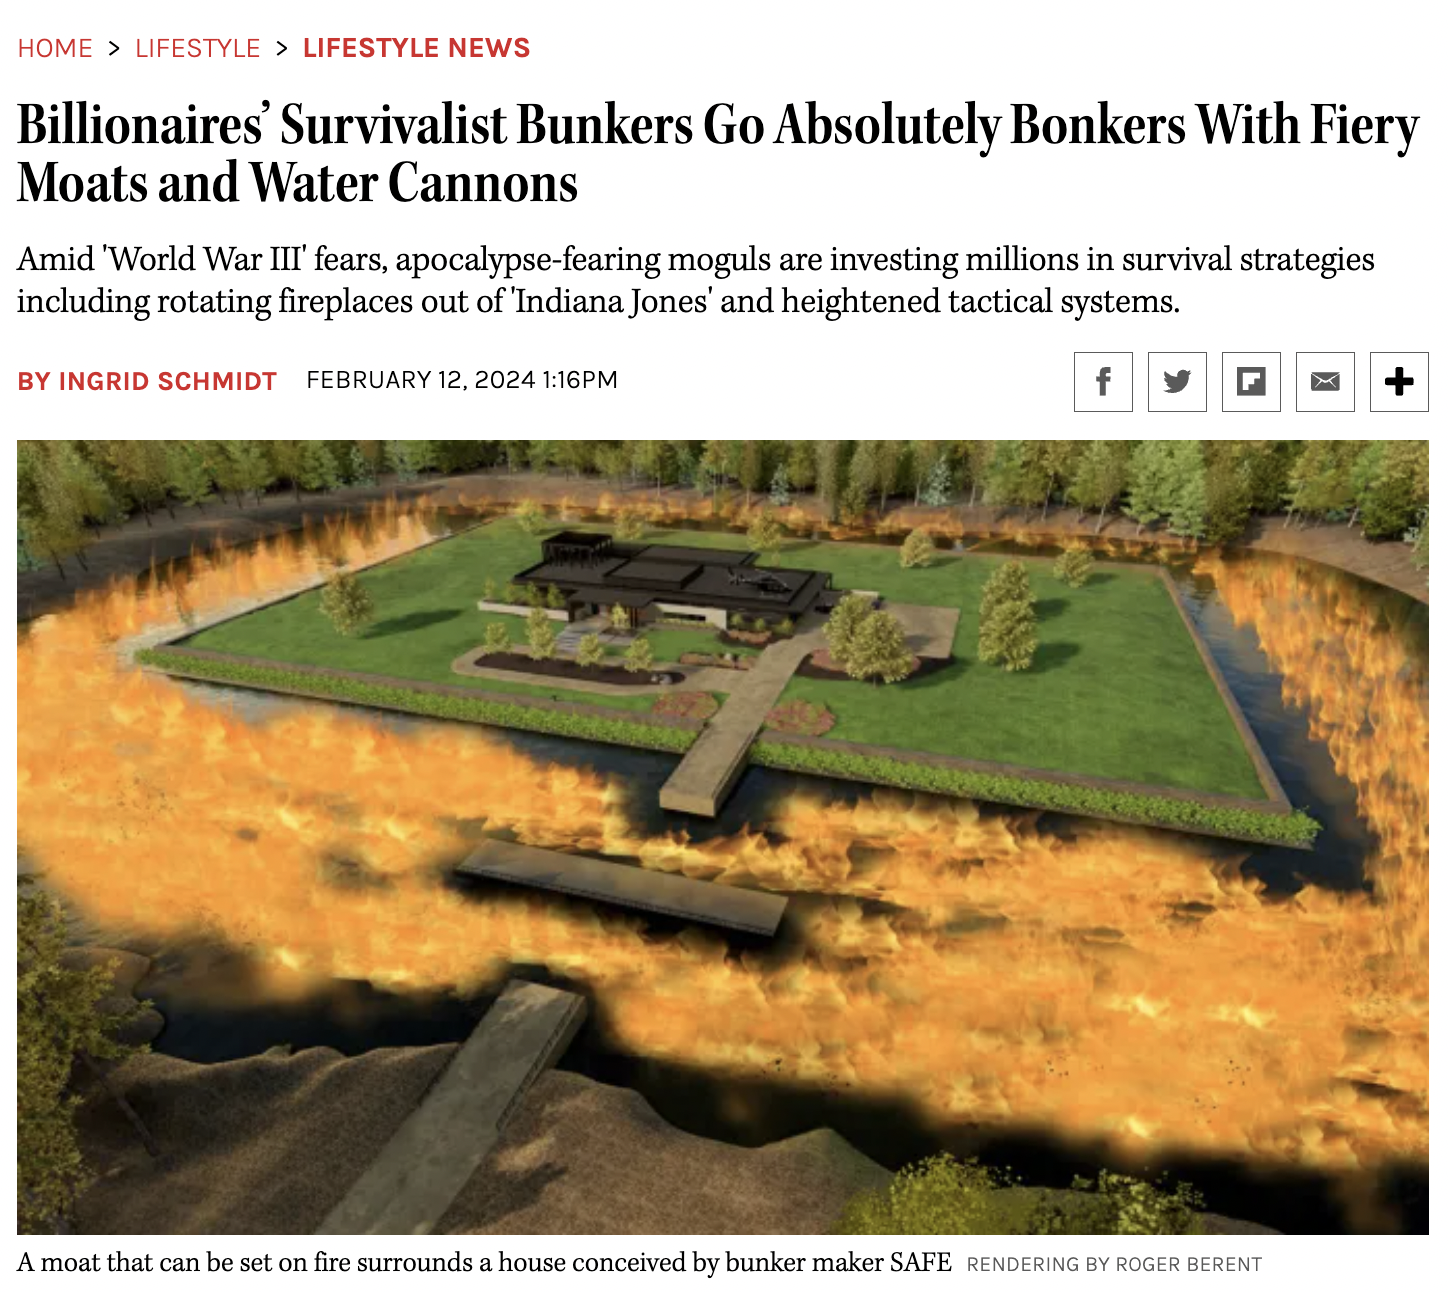 billionaire bunkers 2024 - Home > Lifestyle > Lifestyle News Billionaires' Survivalist Bunkers Go Absolutely Bonkers With Fiery Moats and Water Cannons Amid 'World War Iii' fears, apocalypsefearing moguls are investing millions in survival strategies incl